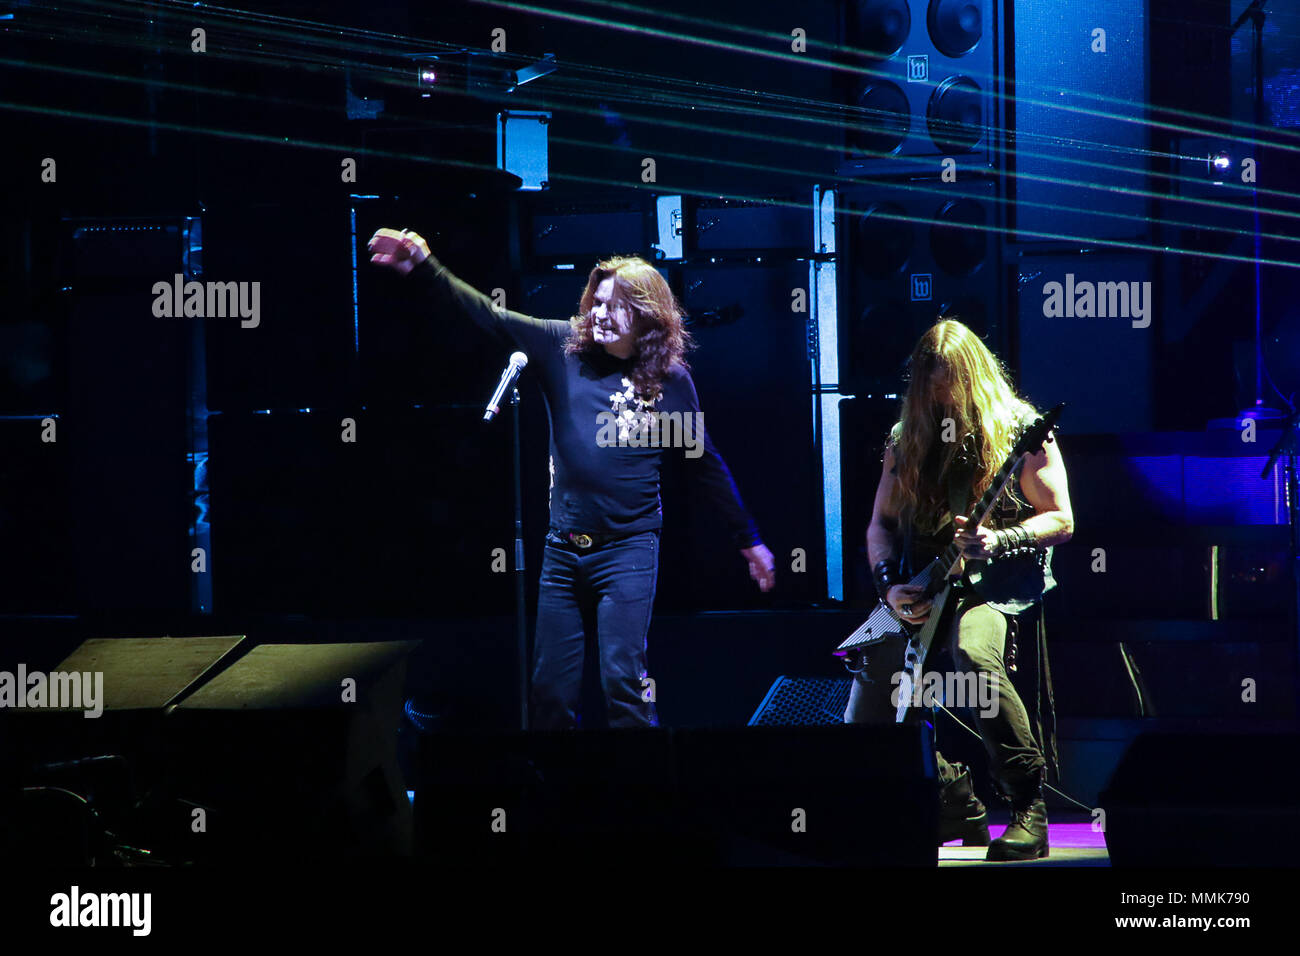 Buenos Aires, Argentina. 12th May 2018.  Ozzy Osbourne on stage during the show of 'No more tours 2' this friday night on Obras Sanitarias de Buenos Aires Stadium, Argentina. (Photo: Néstor J. Beremblum / Alamy News) Credit: Néstor J. Beremblum/Alamy Live News Stock Photo